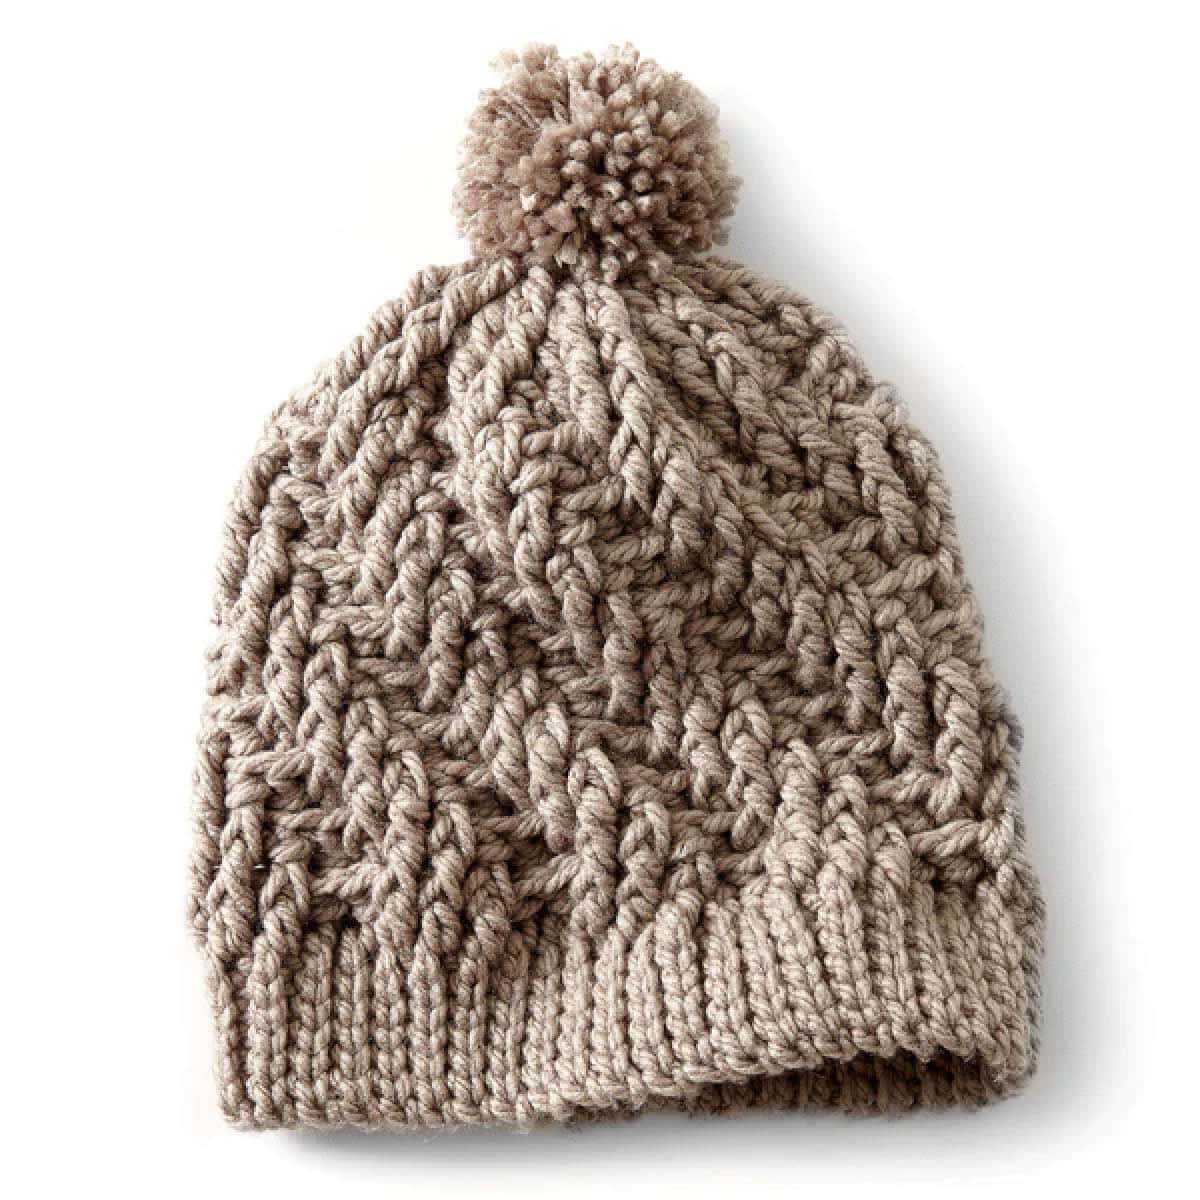 Crochet Easy Stepping Texture Hat Pattern